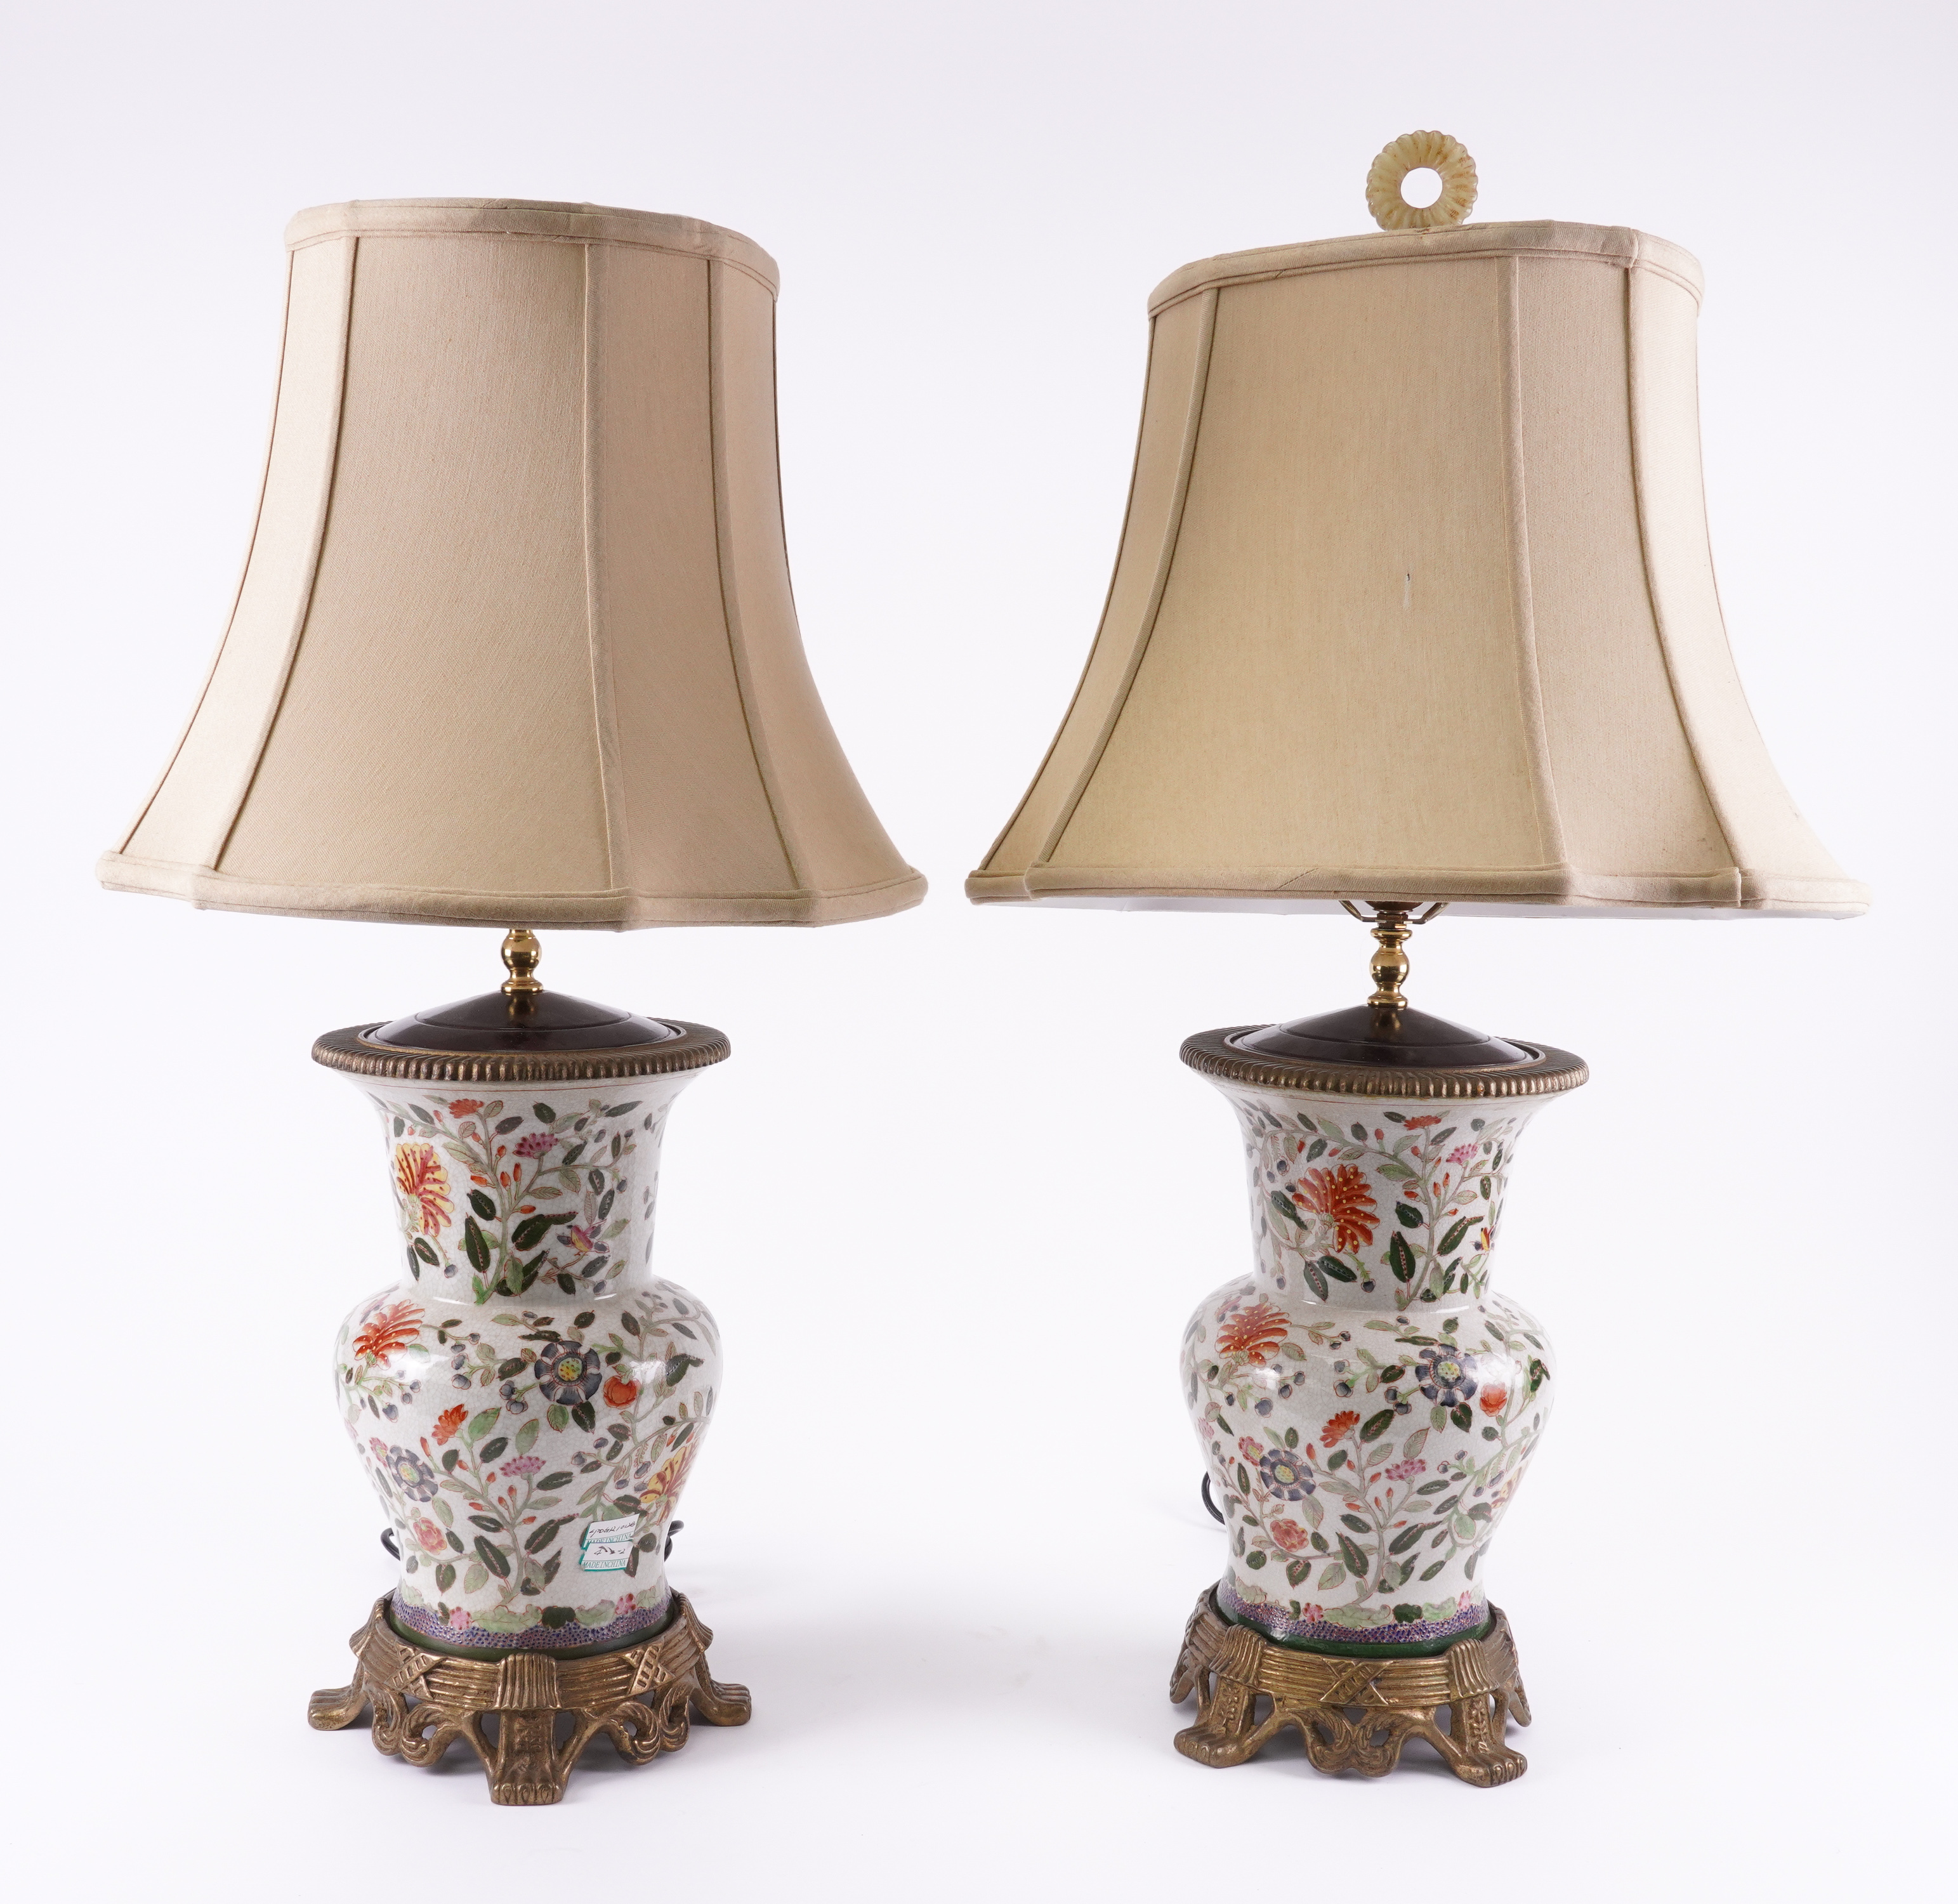 A PAIR OF GILT-METAL MOUNTED ASIAN TABLE LAMPS (2)